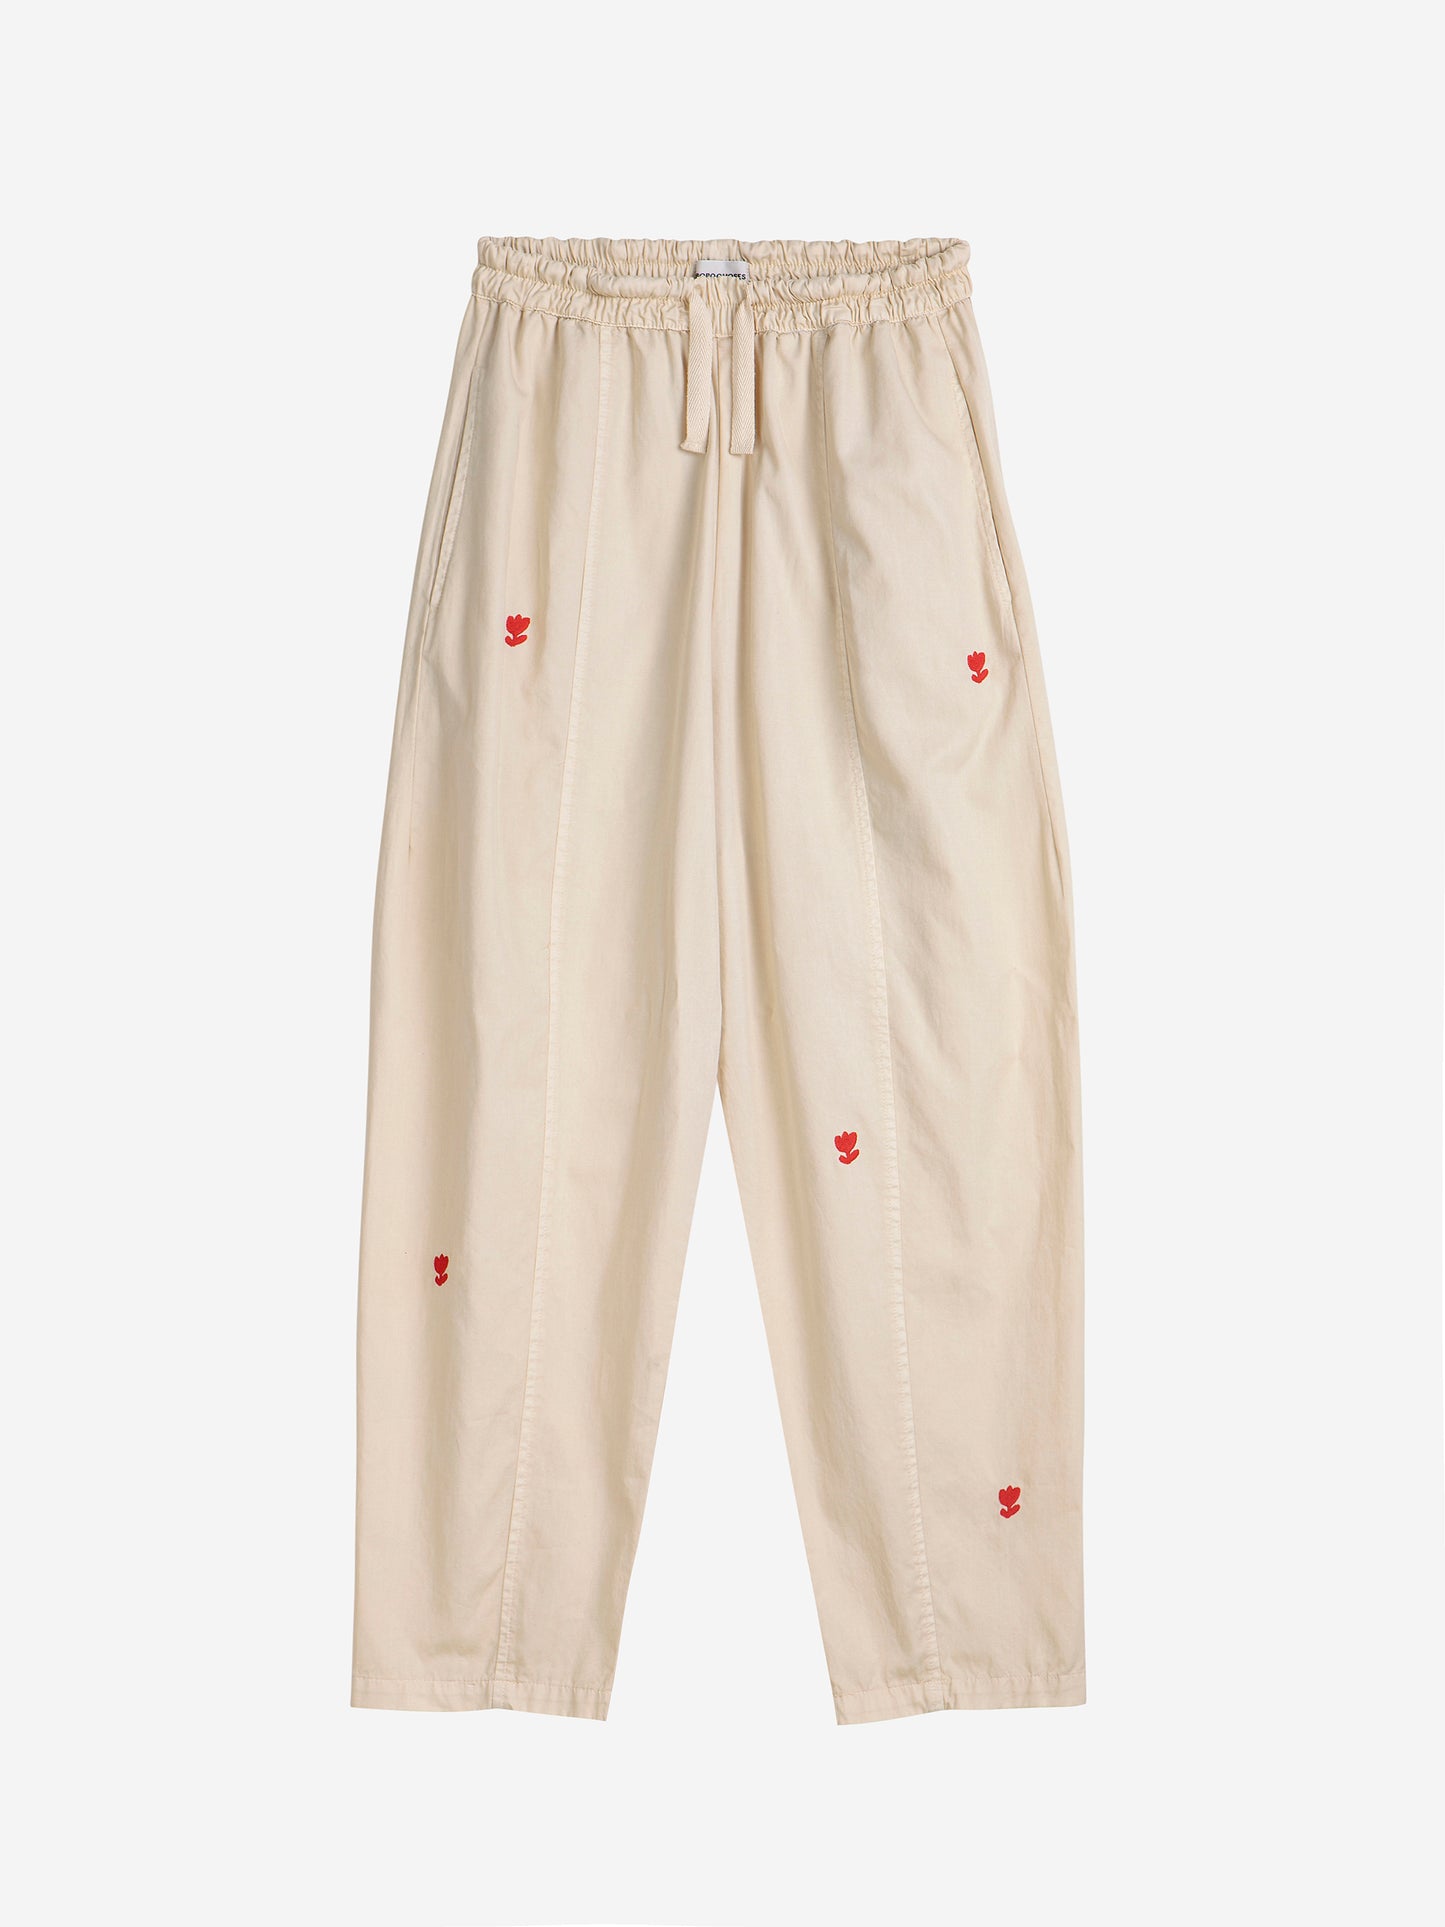 Flower embroidery Unisex Pants